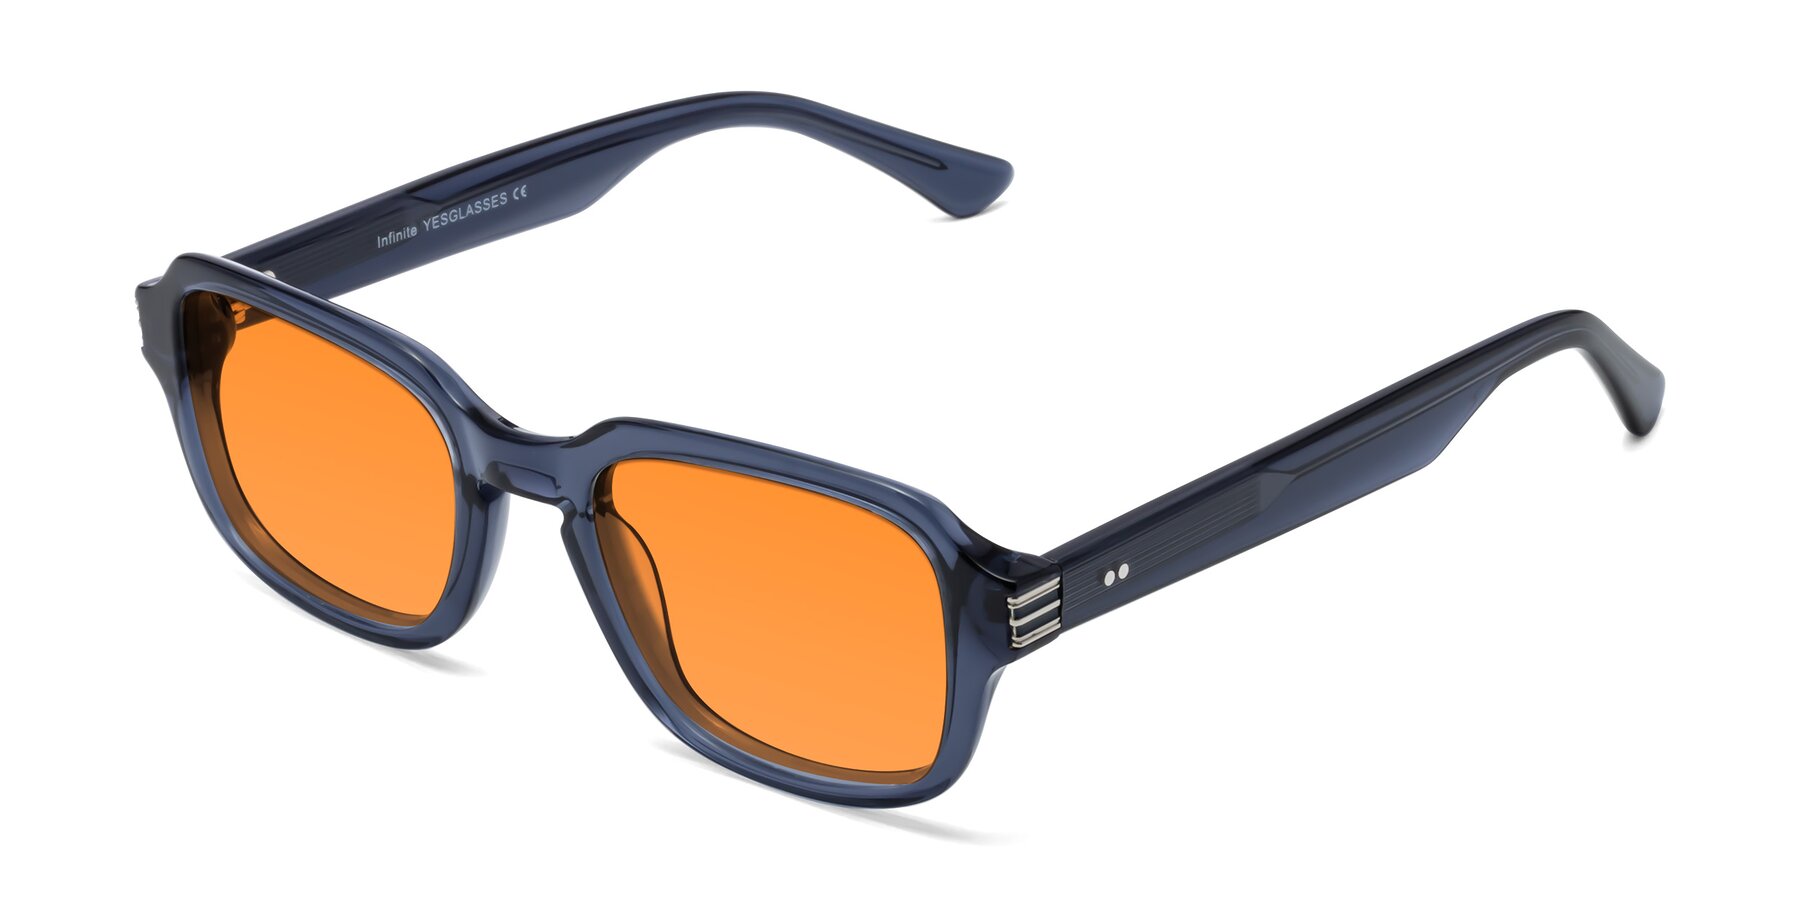 Angle of Infinite in Dark Blue with Orange Tinted Lenses